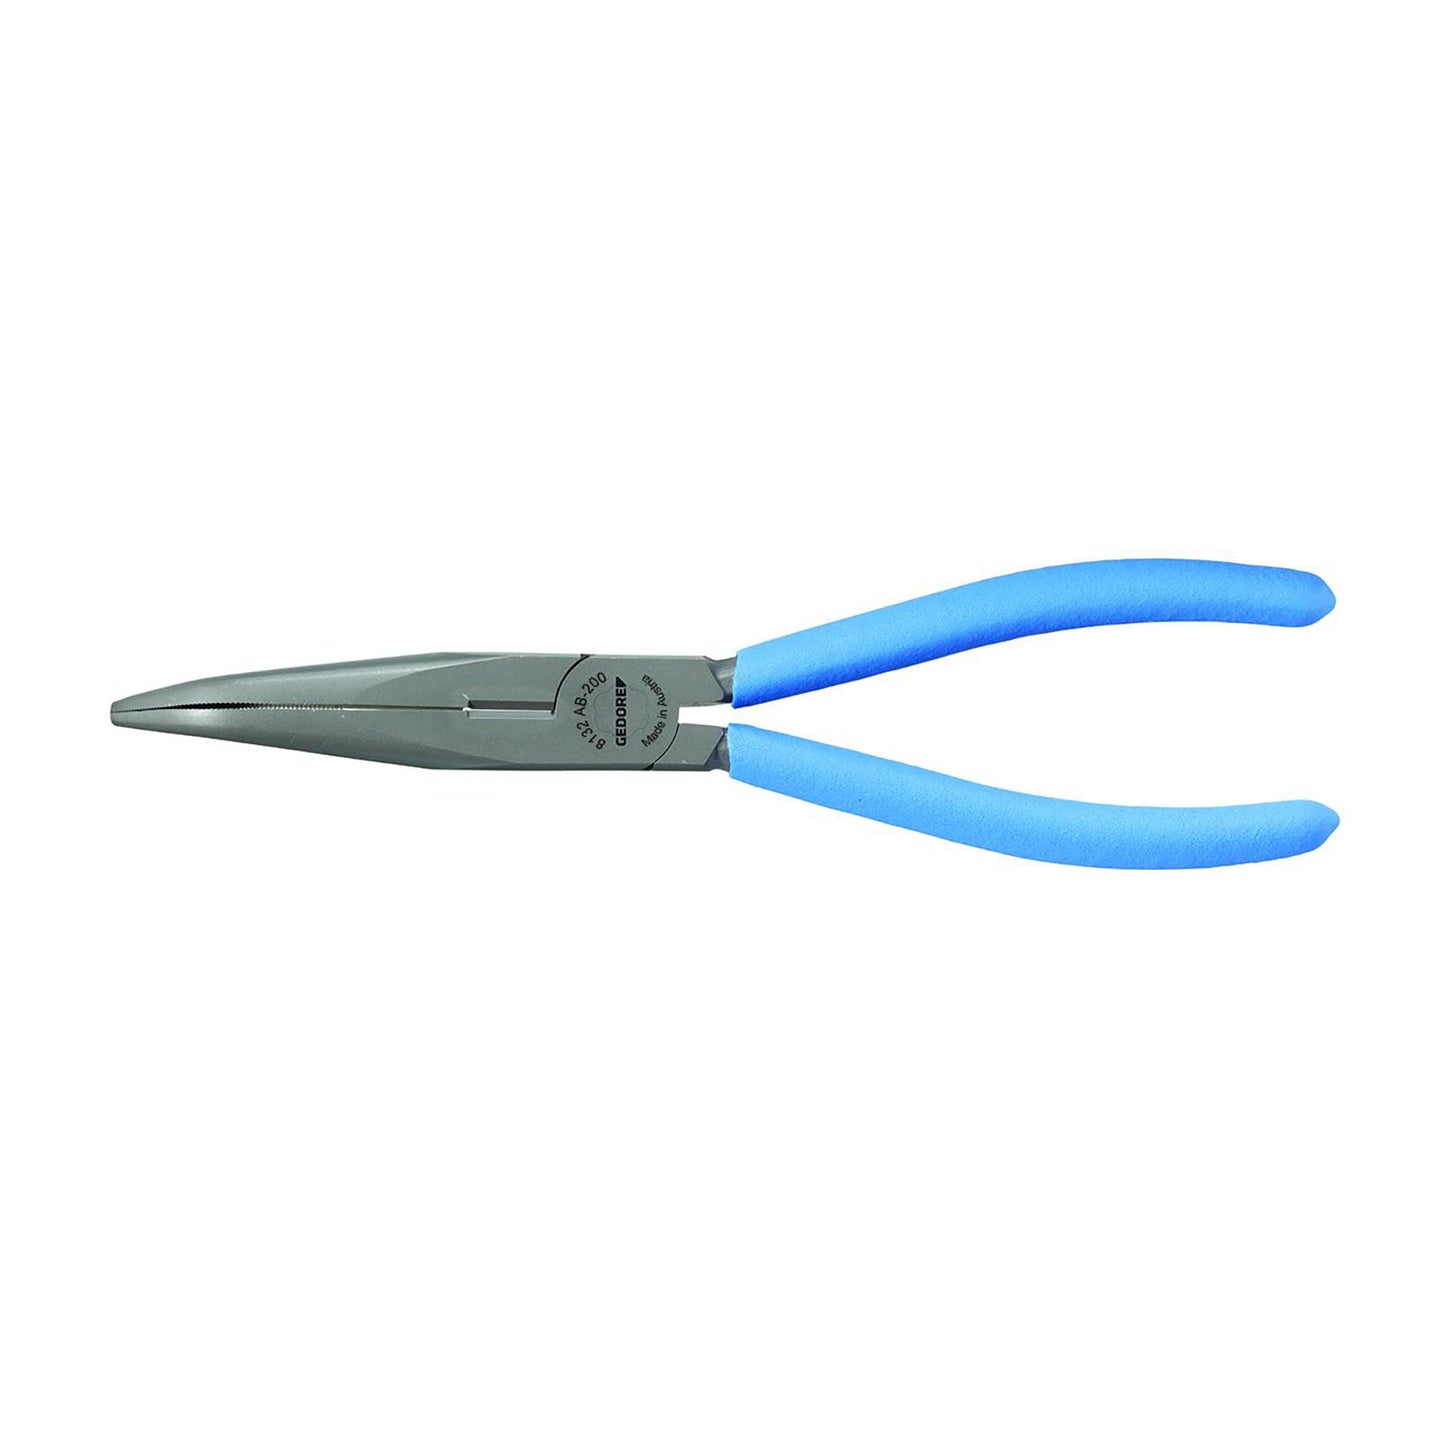 GEDORE 8132 AB-200 TL - Semi-round nose pliers 200mm (6711260)